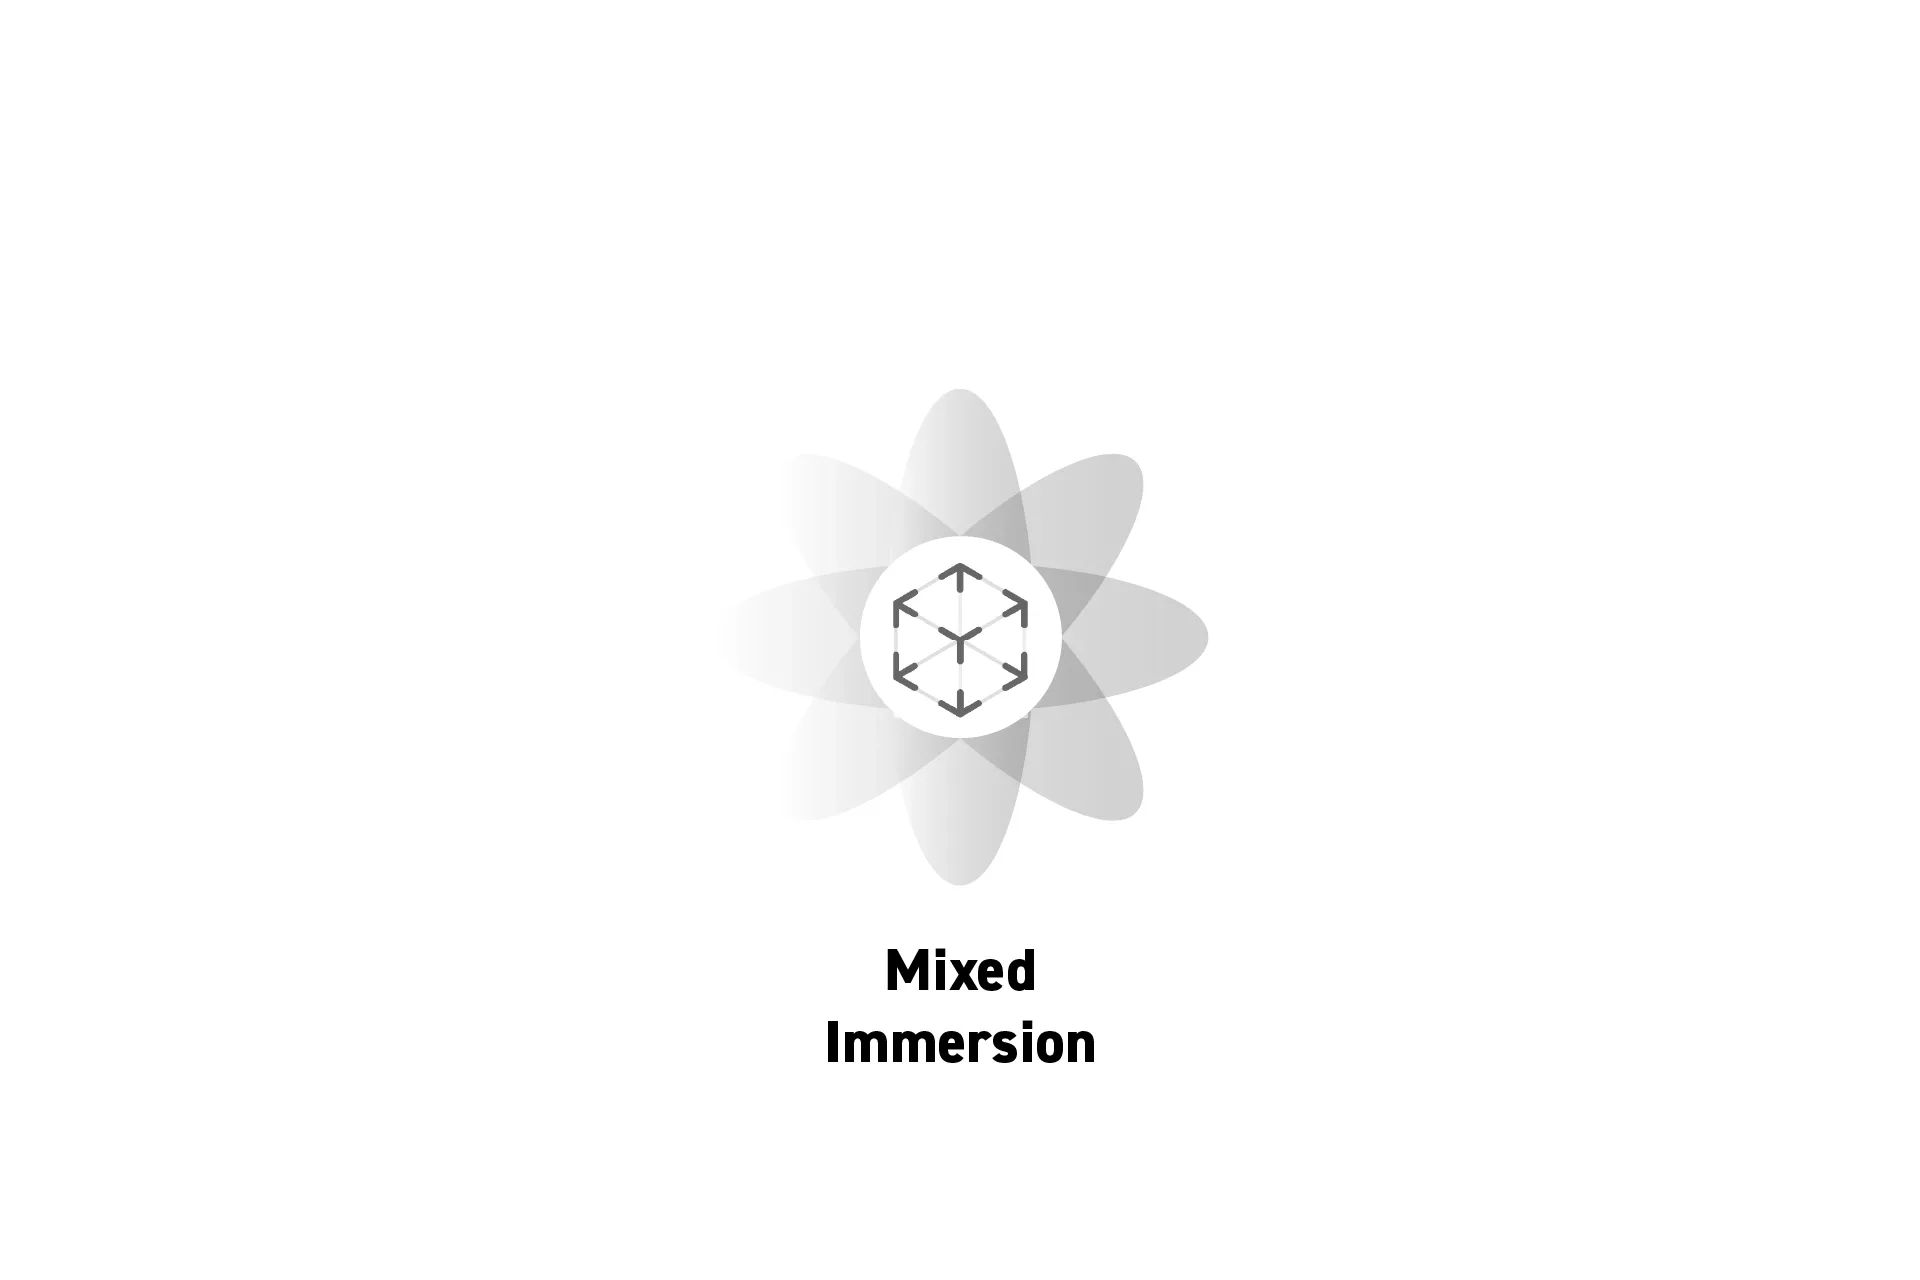 A flower that represents spatial computing with the text "Mixed Immersion" beneath it.